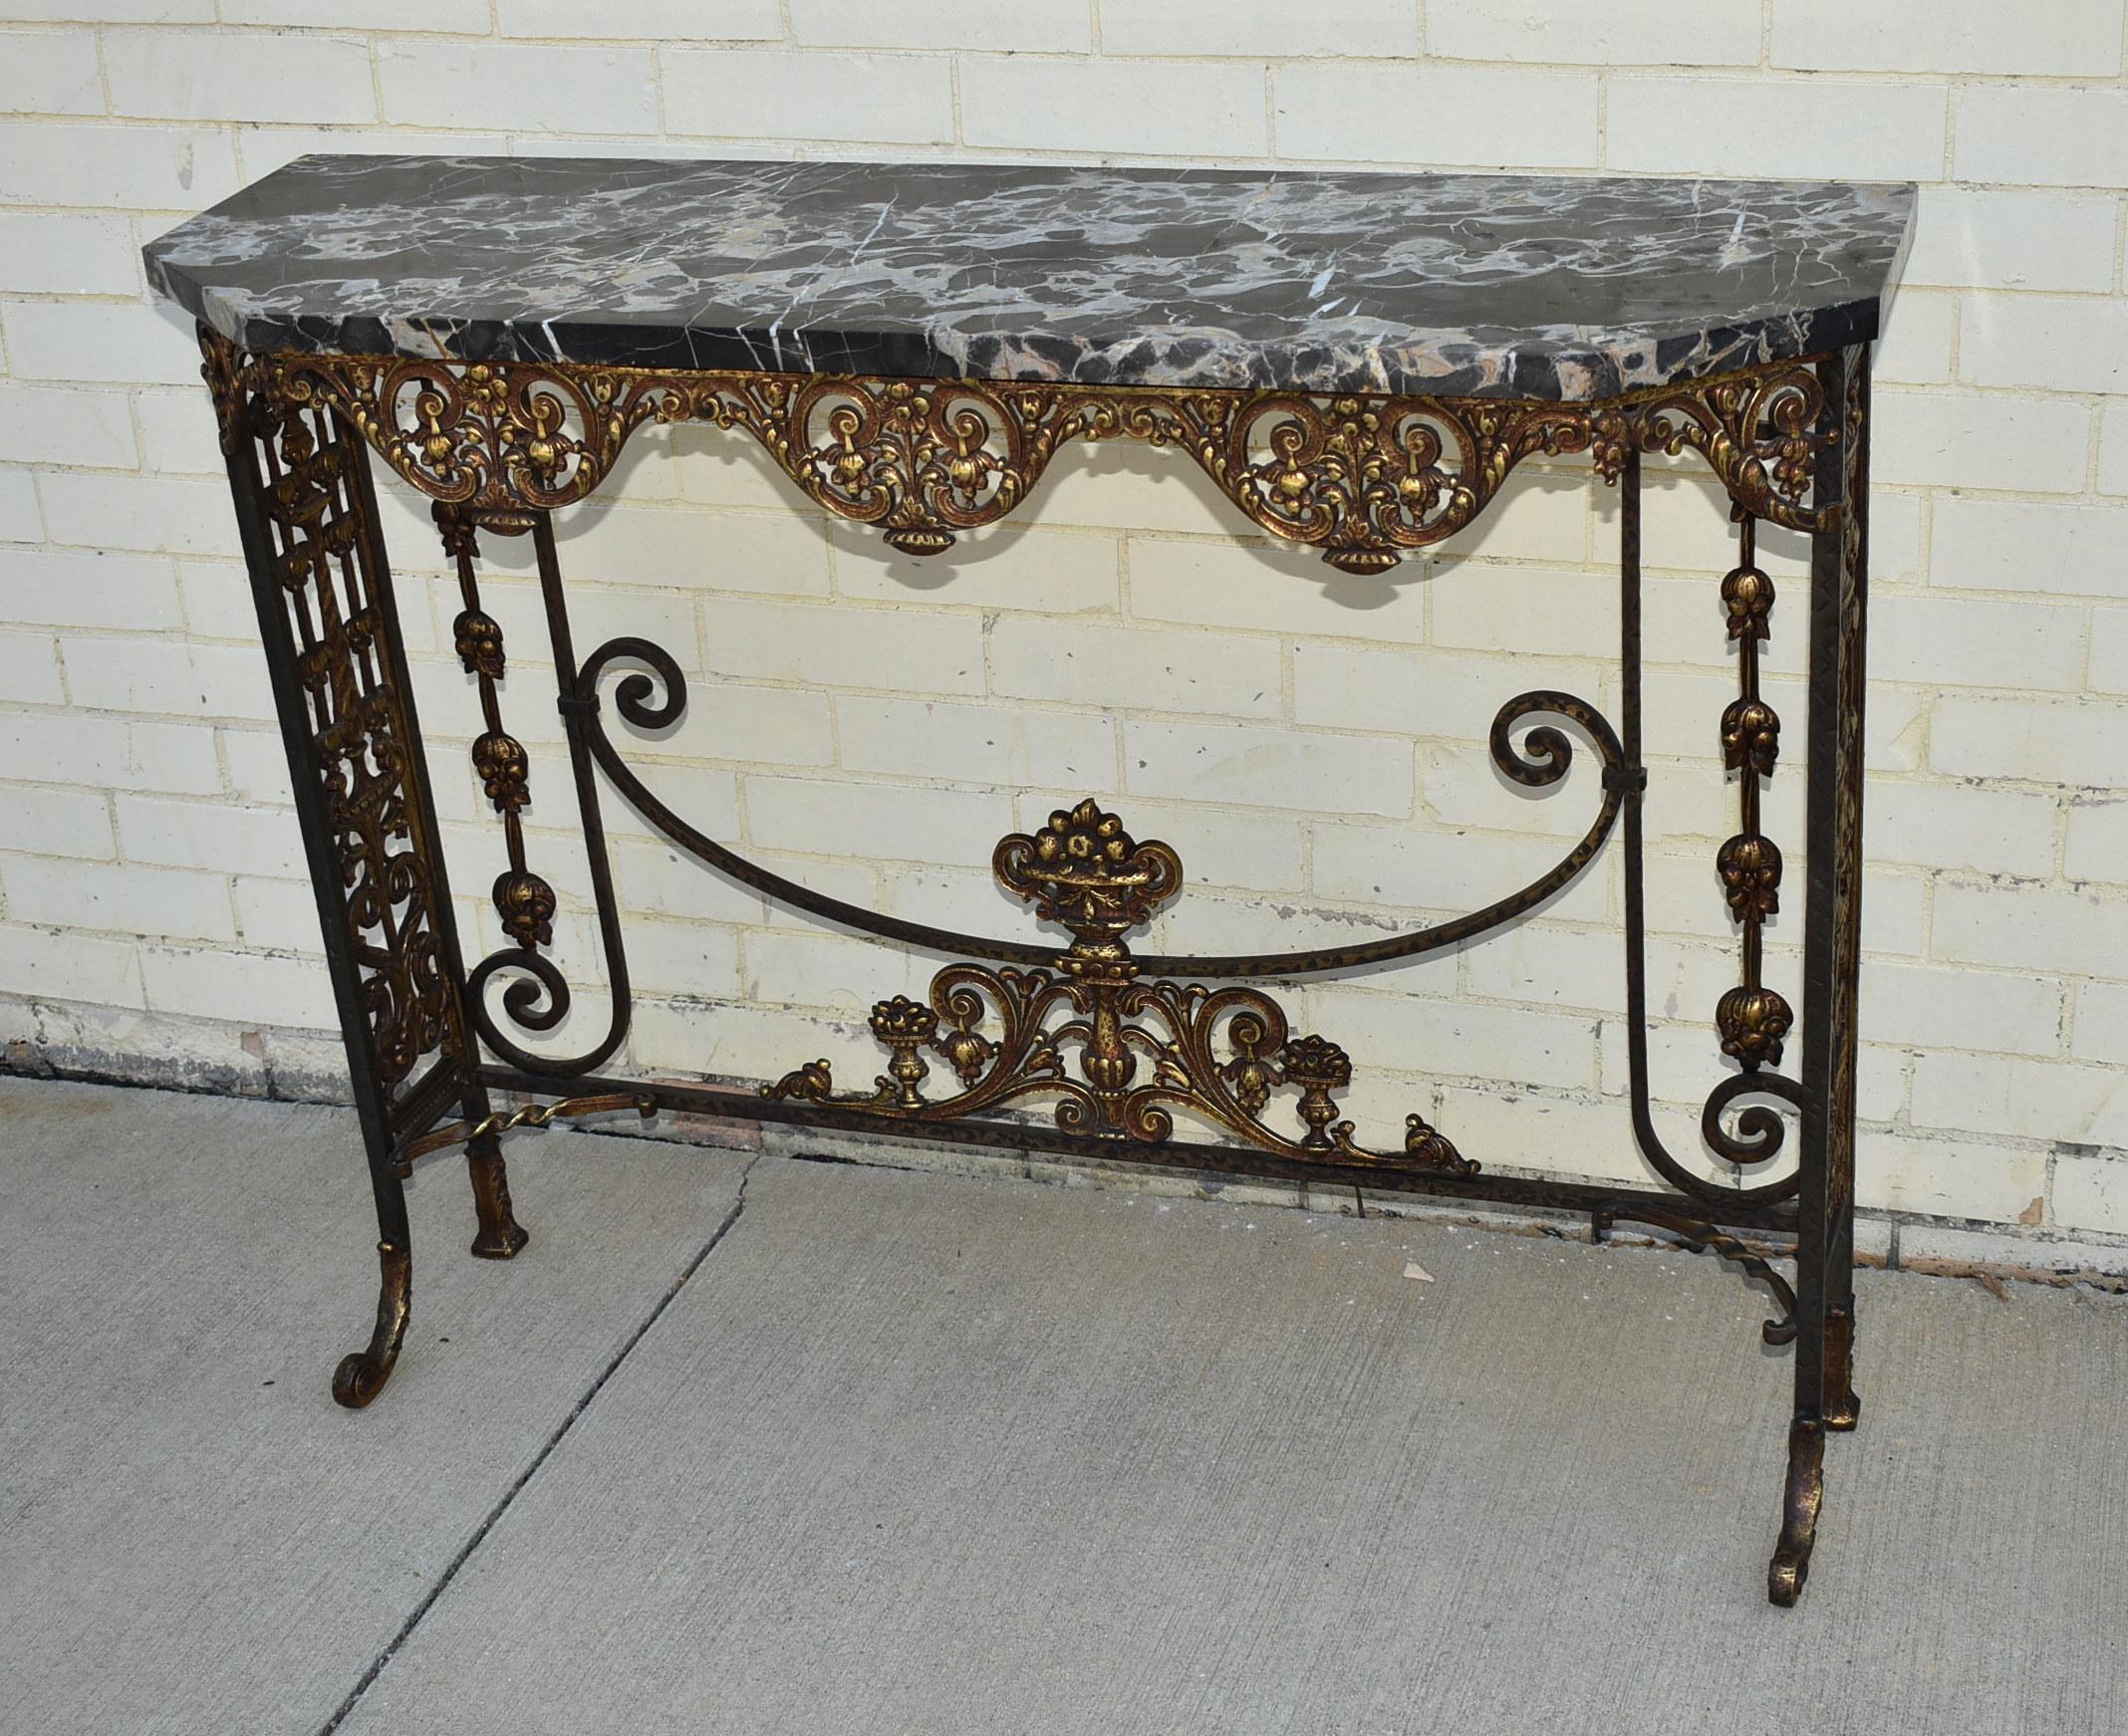 Antique circa 1920s hammered iron and bronze marble top entry console table and mirror. Nicely designed metalwork with original finish. Mirror measures 24.25